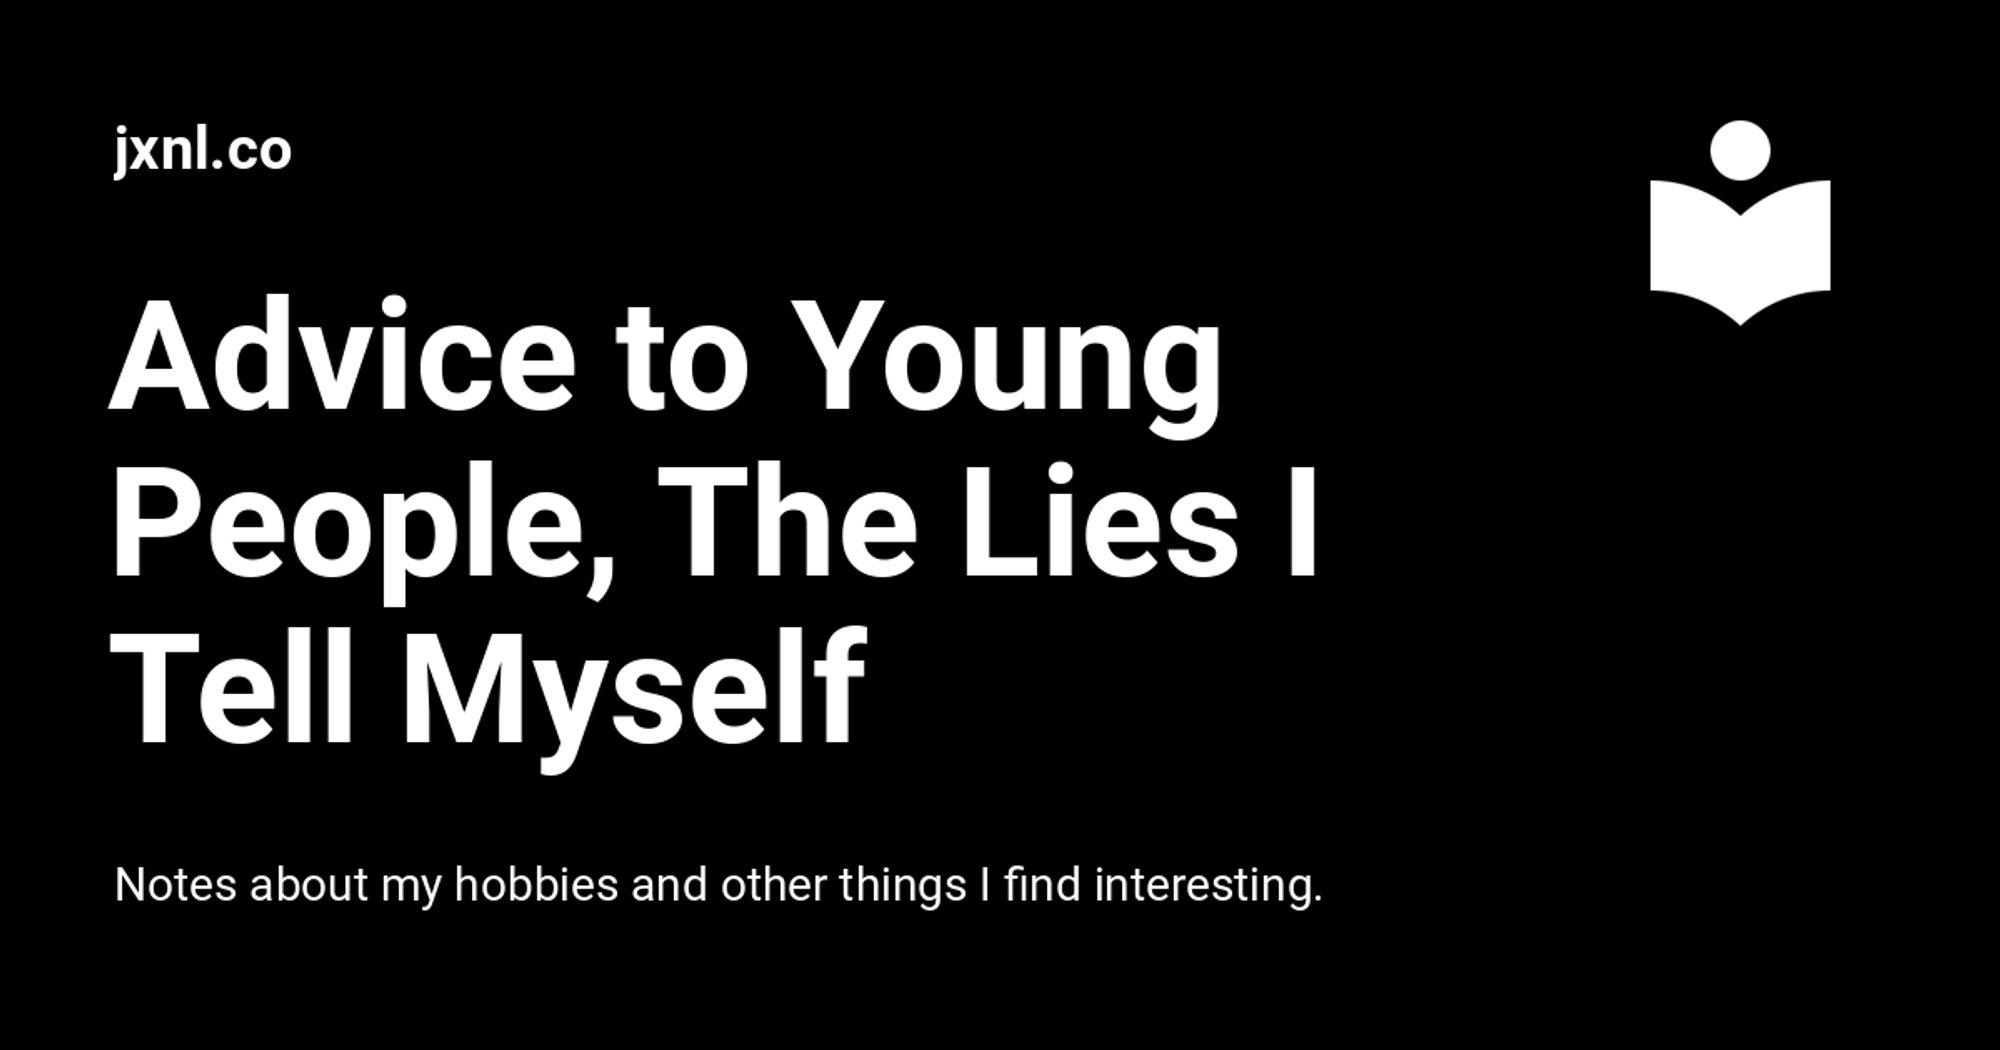 Advice to Young People, The Lies I Tell Myself - jxnl.co